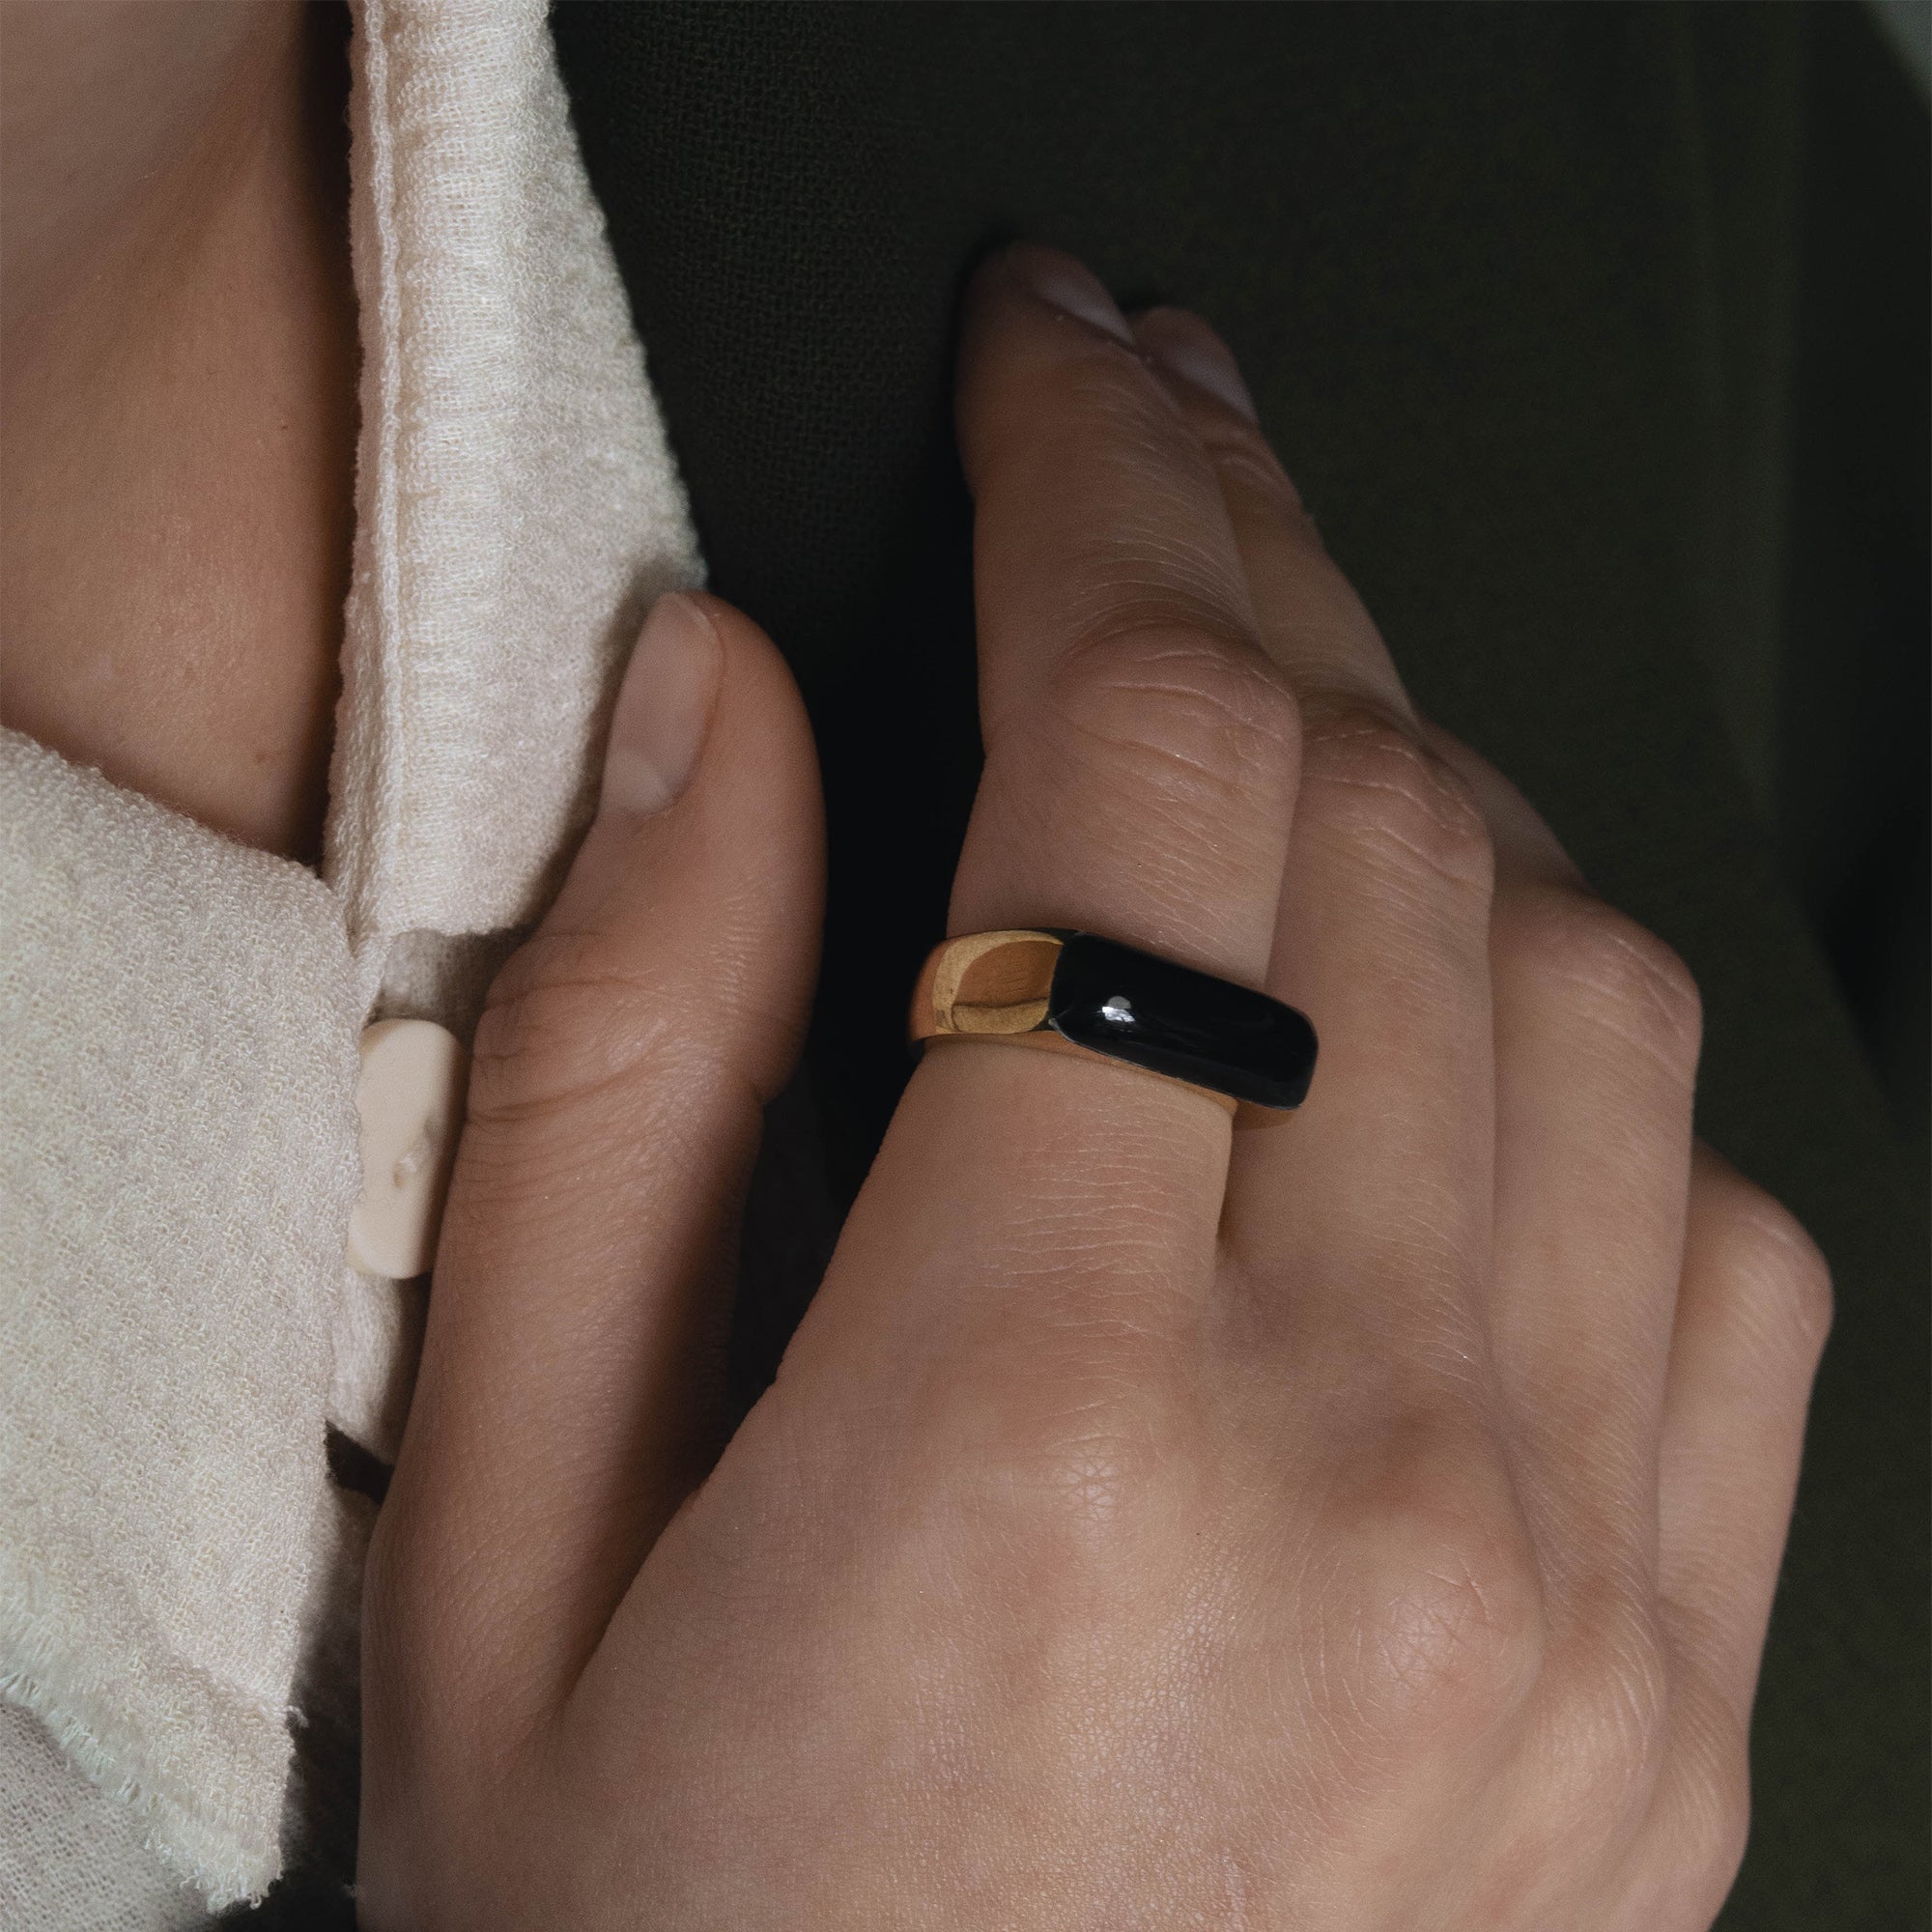 Horn Inset Ring Jewelry 